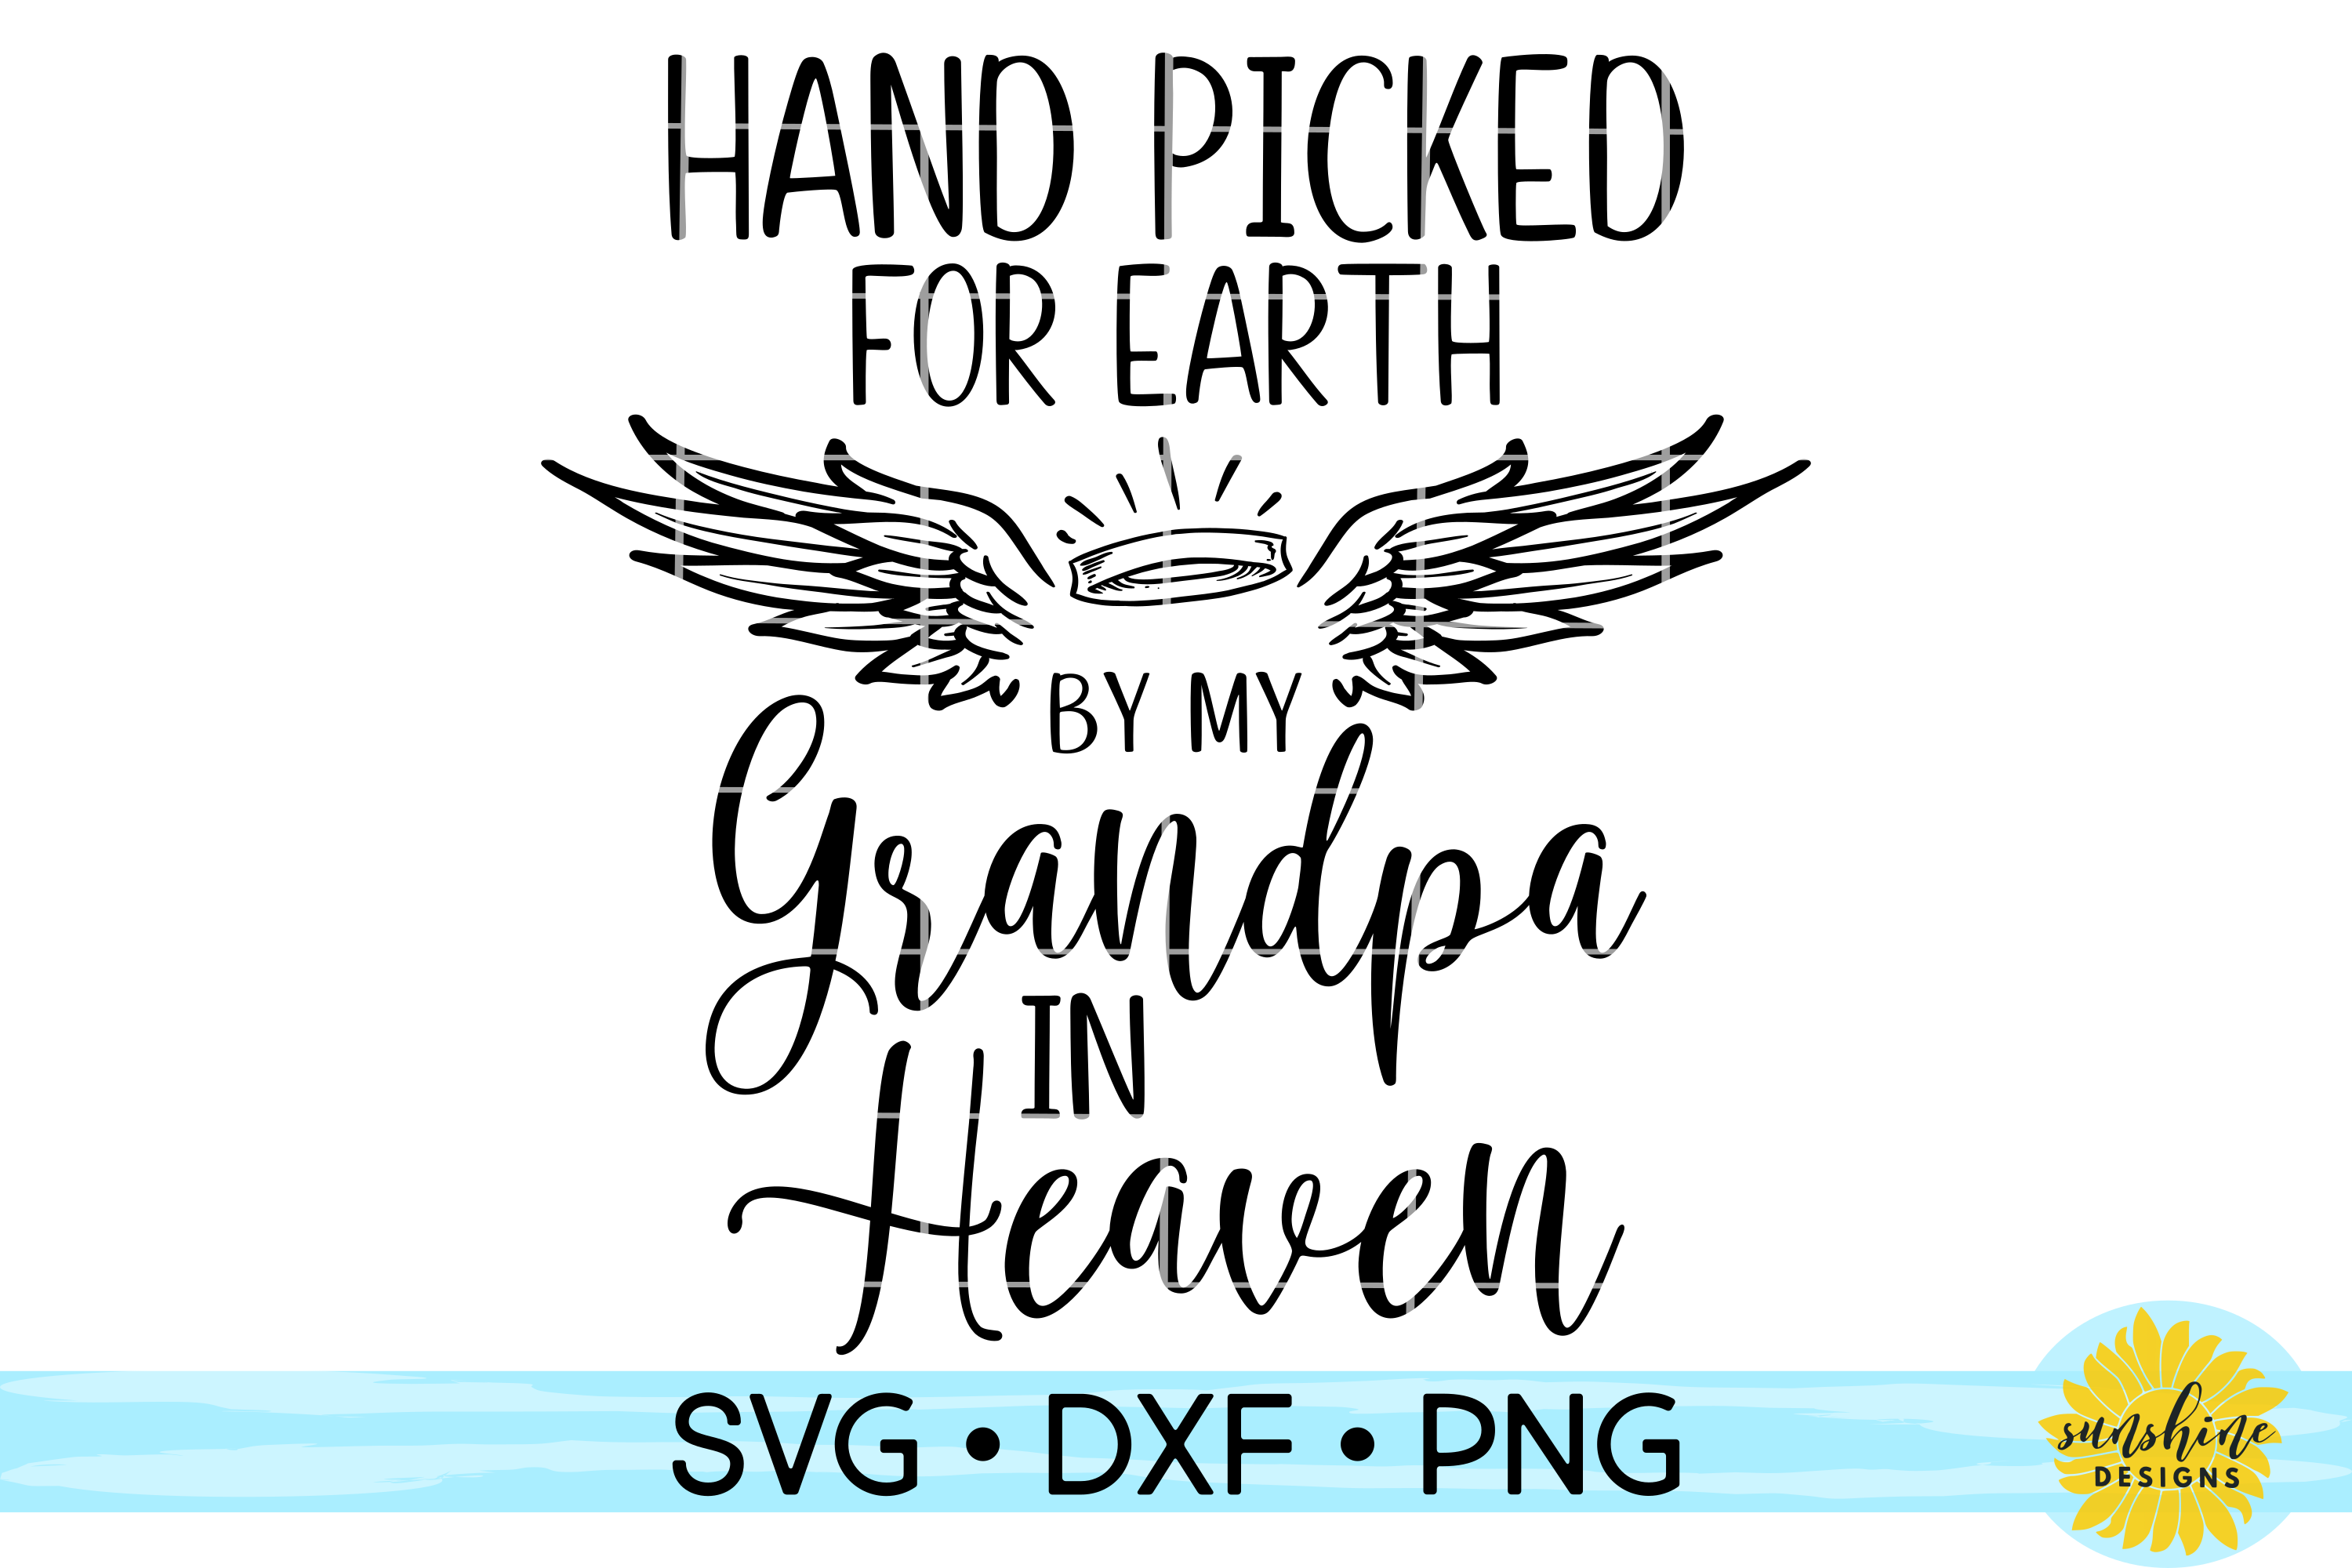 Download HAND PICKED FOR EARTH BY MY GRANDPA IN HEAVEN SVG DXF PNG ...